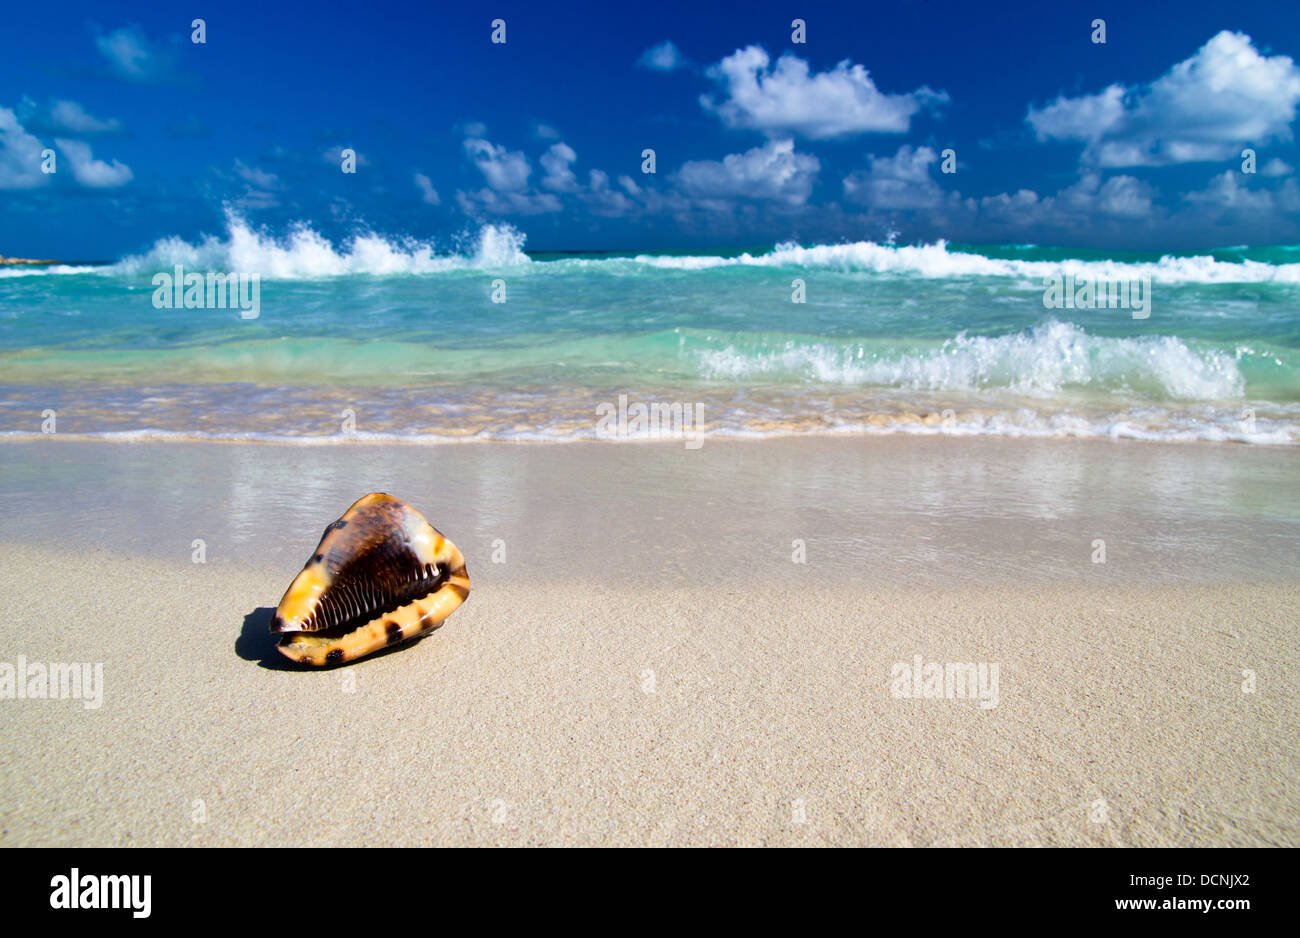 Seashell on beach Banque D'Images